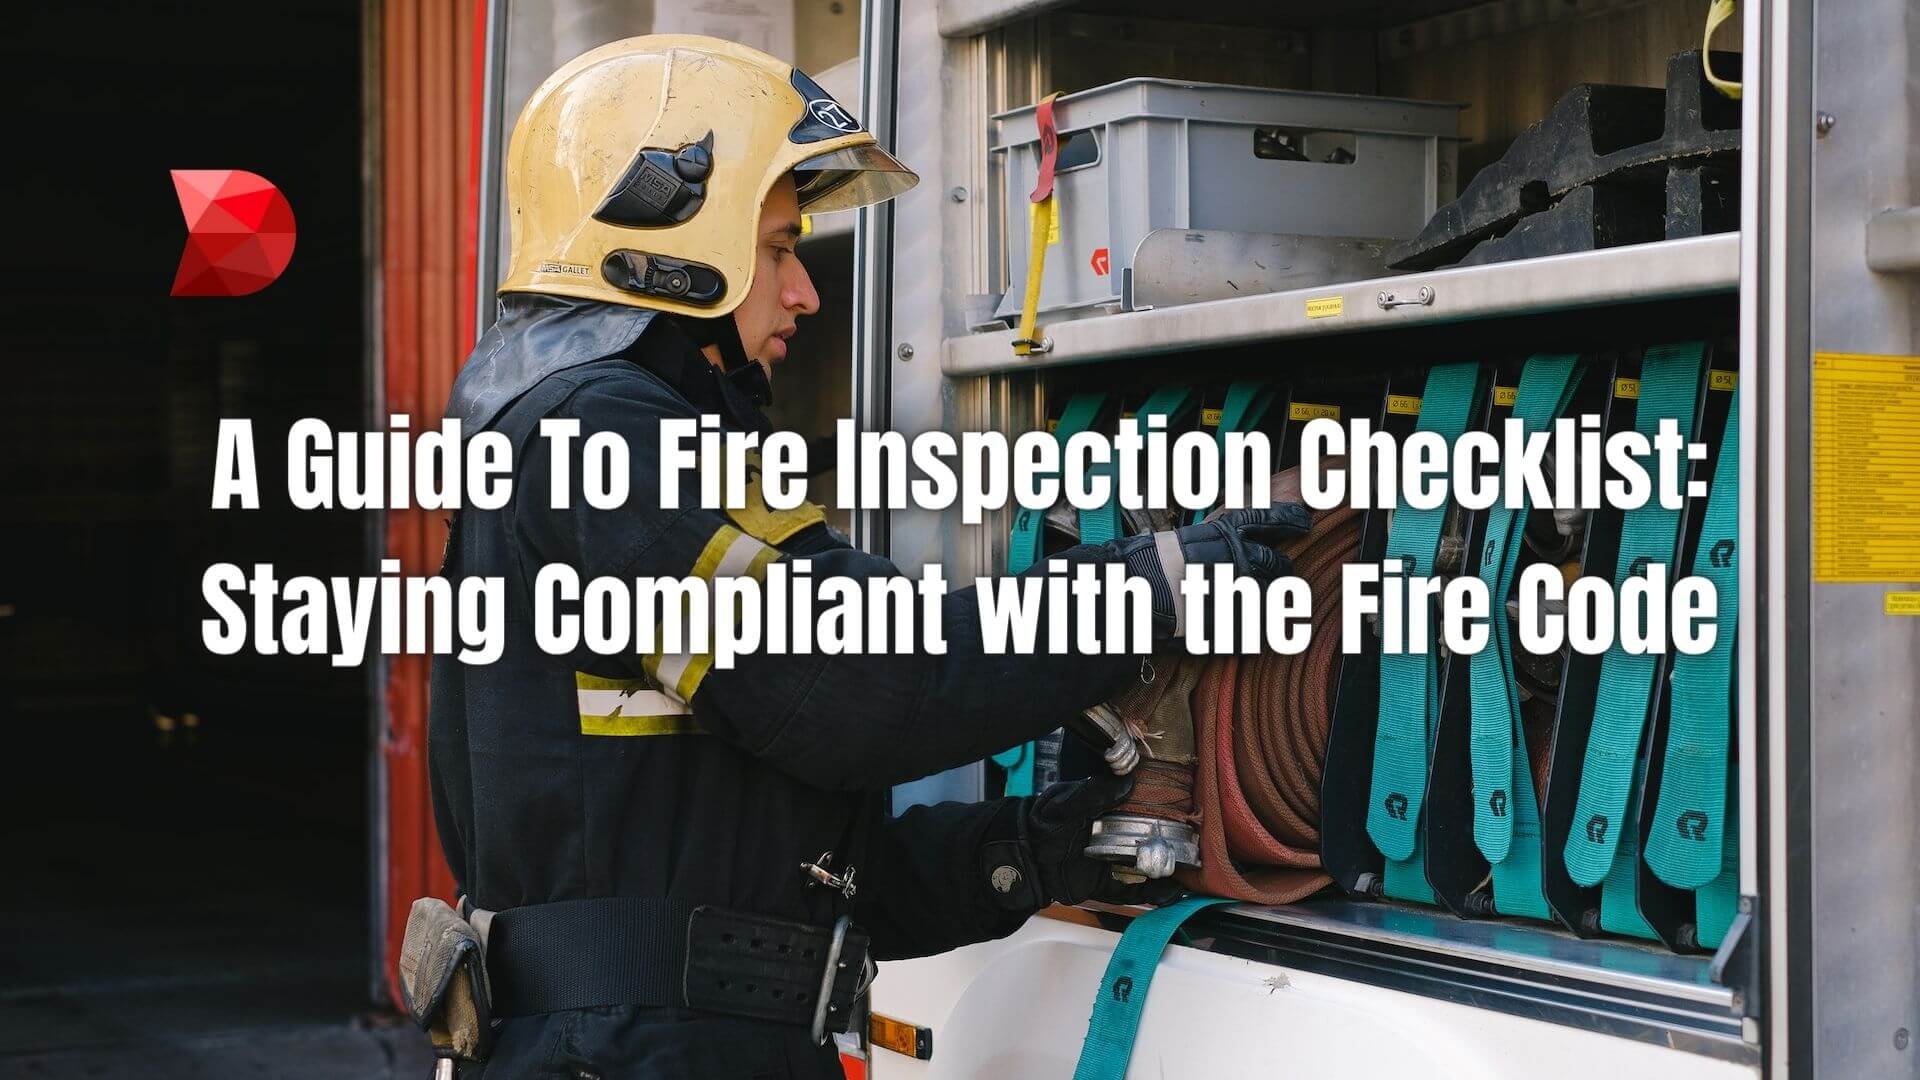 This article will talk about the importance of using a fire inspection checklist and complying with the fire code. Read here to learn more!